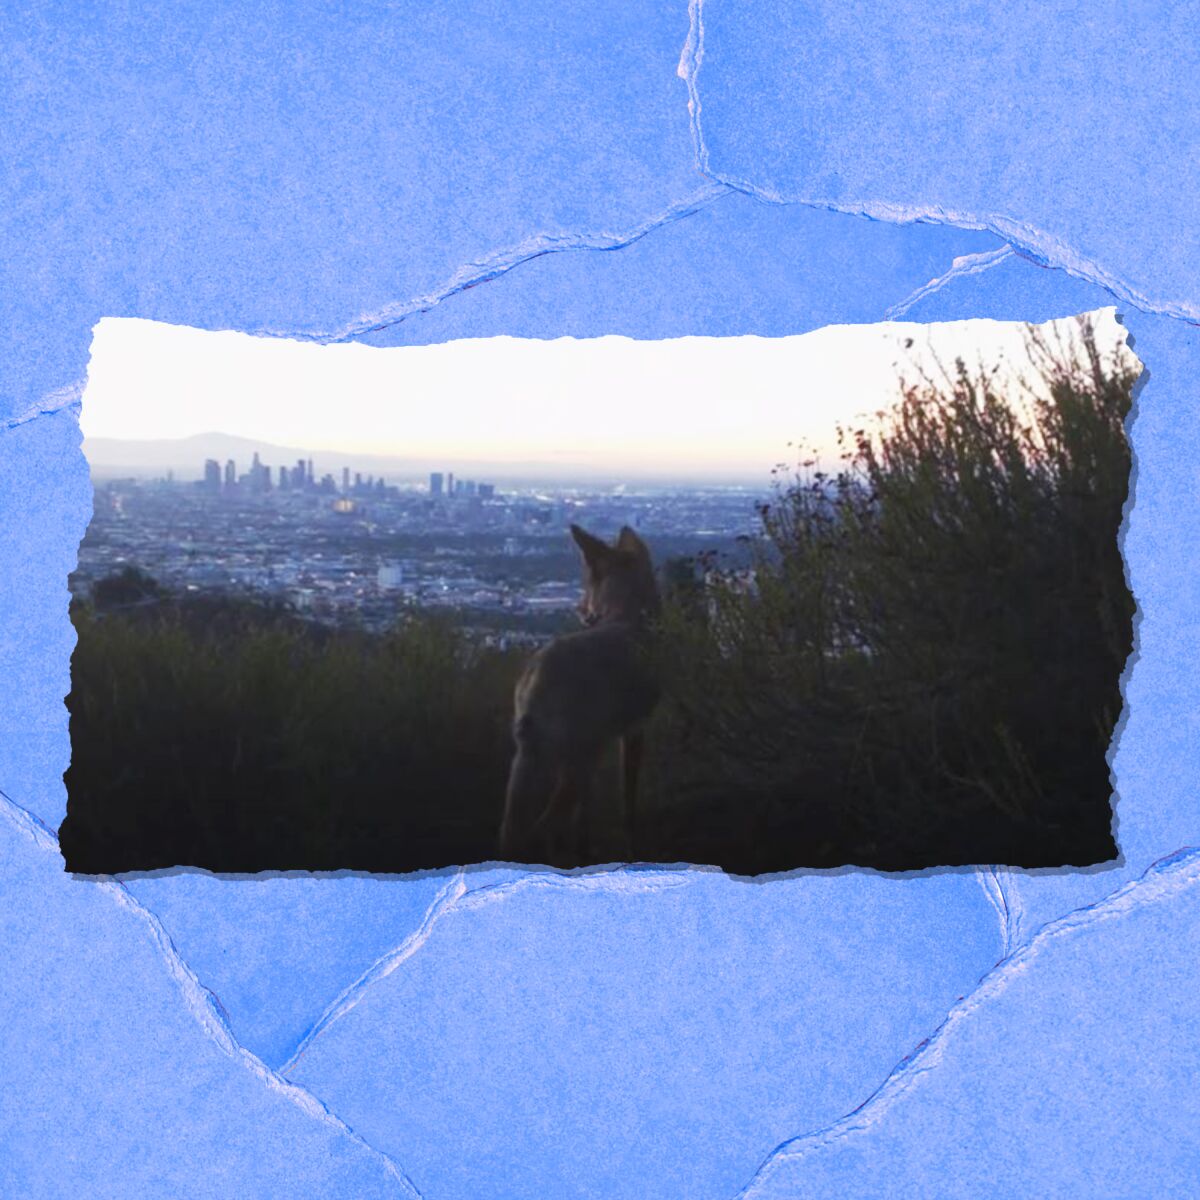 A coyote looks into the distance toward a city skyline.